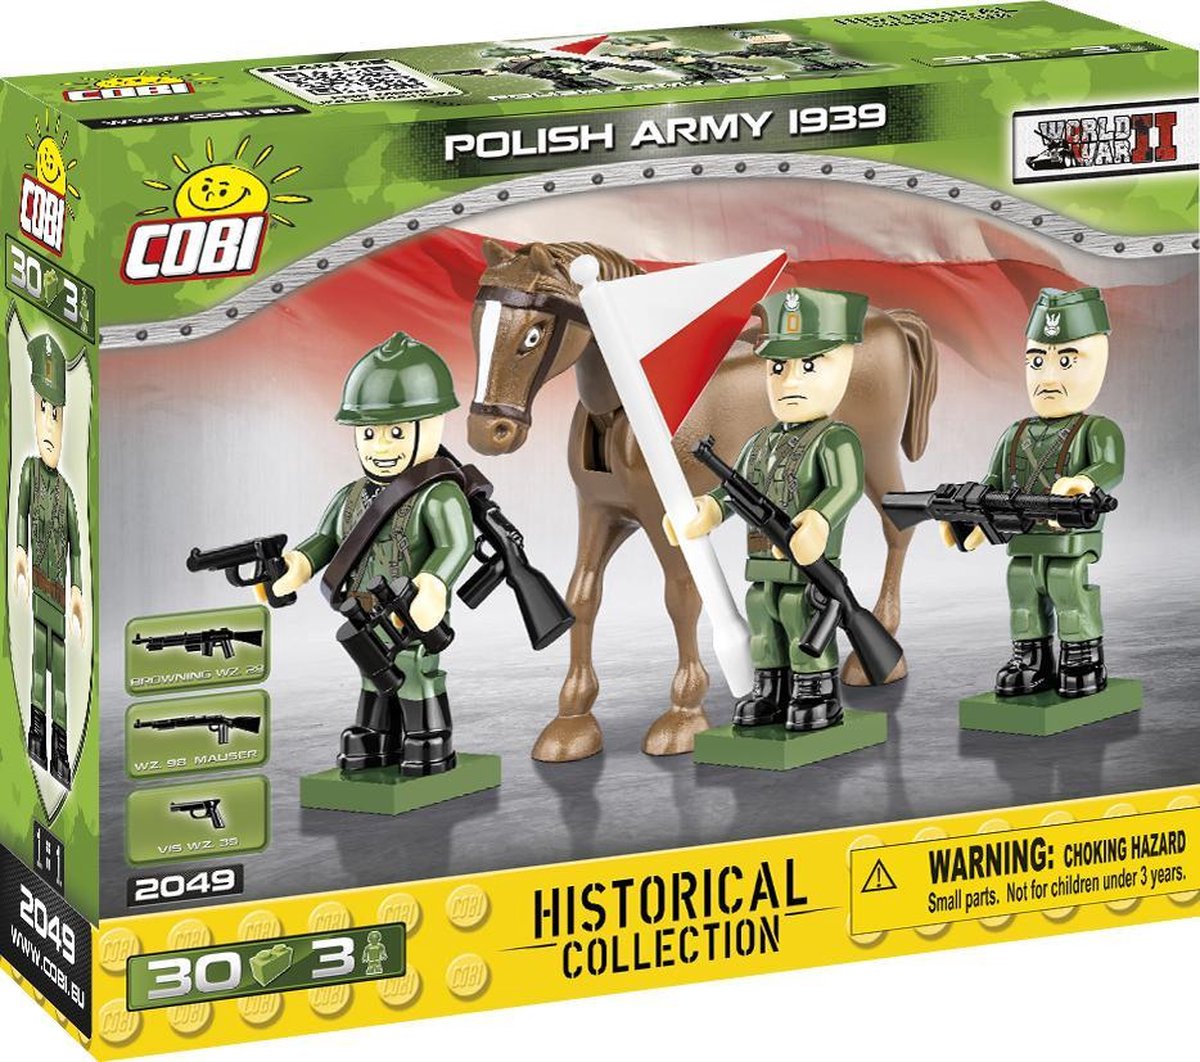 COBI | Historical Collection - WWII | Polish Army 1939 - 3 figures | 2049